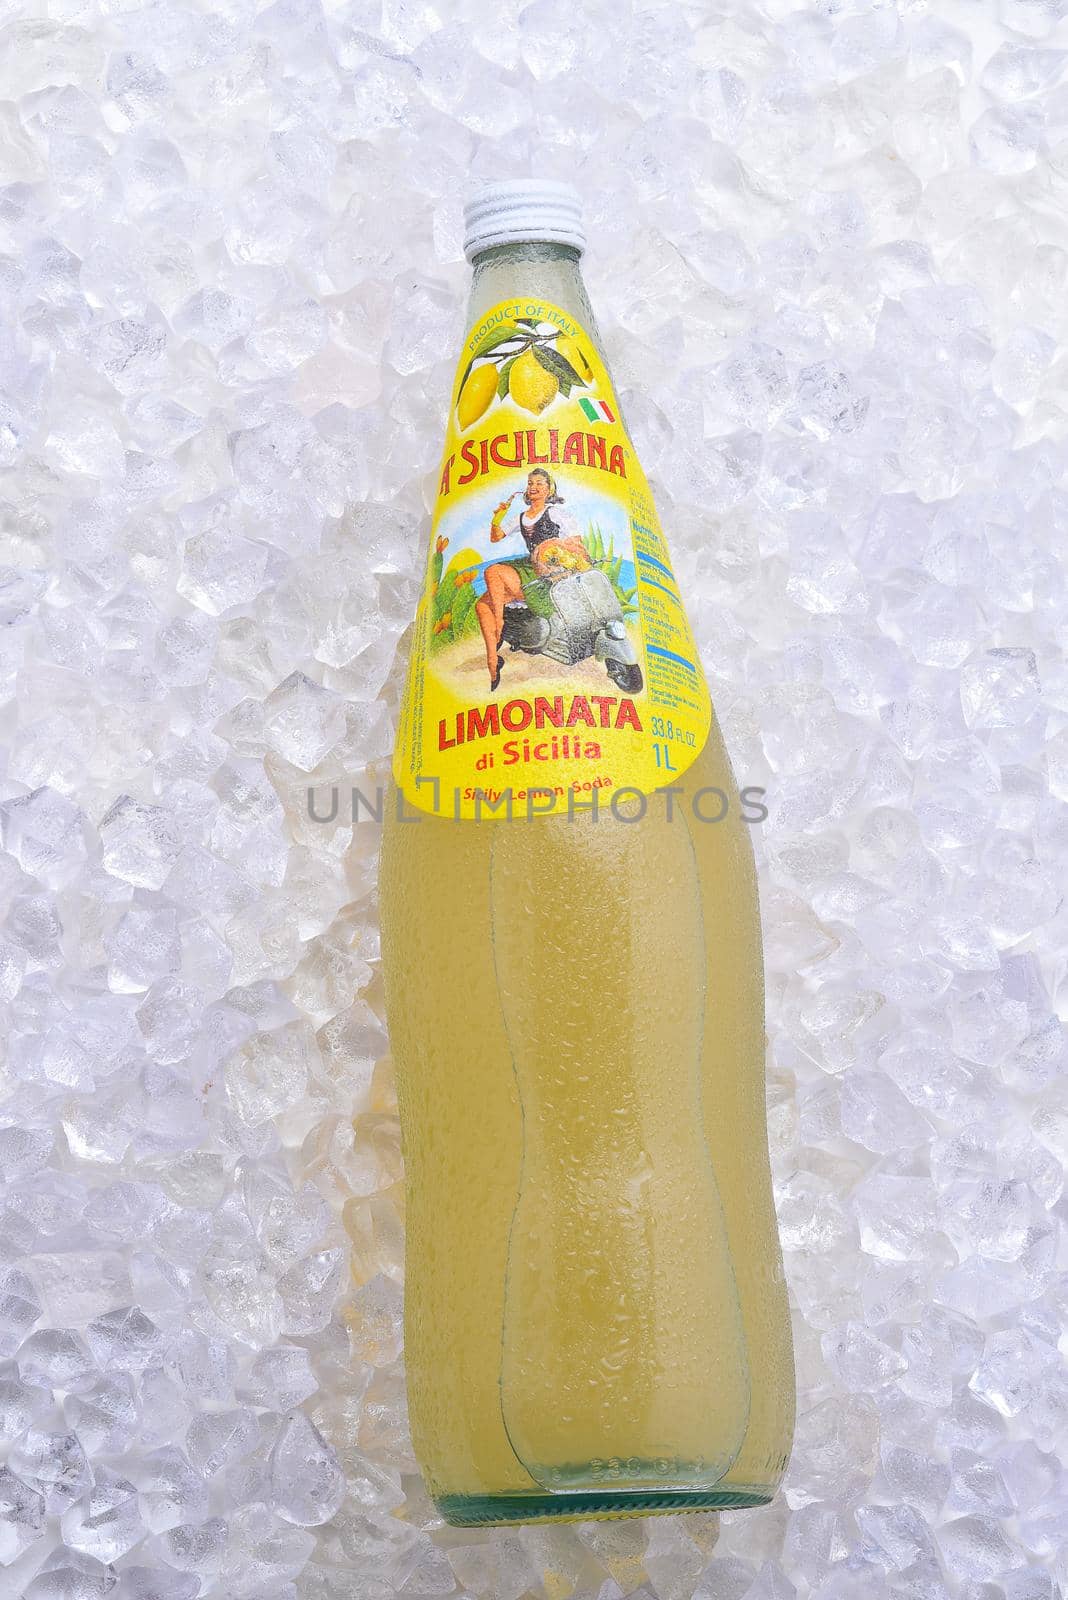 A  bottle of A Siciliana Limonata, a carbonated lemon soda from Italy, on ice by sCukrov